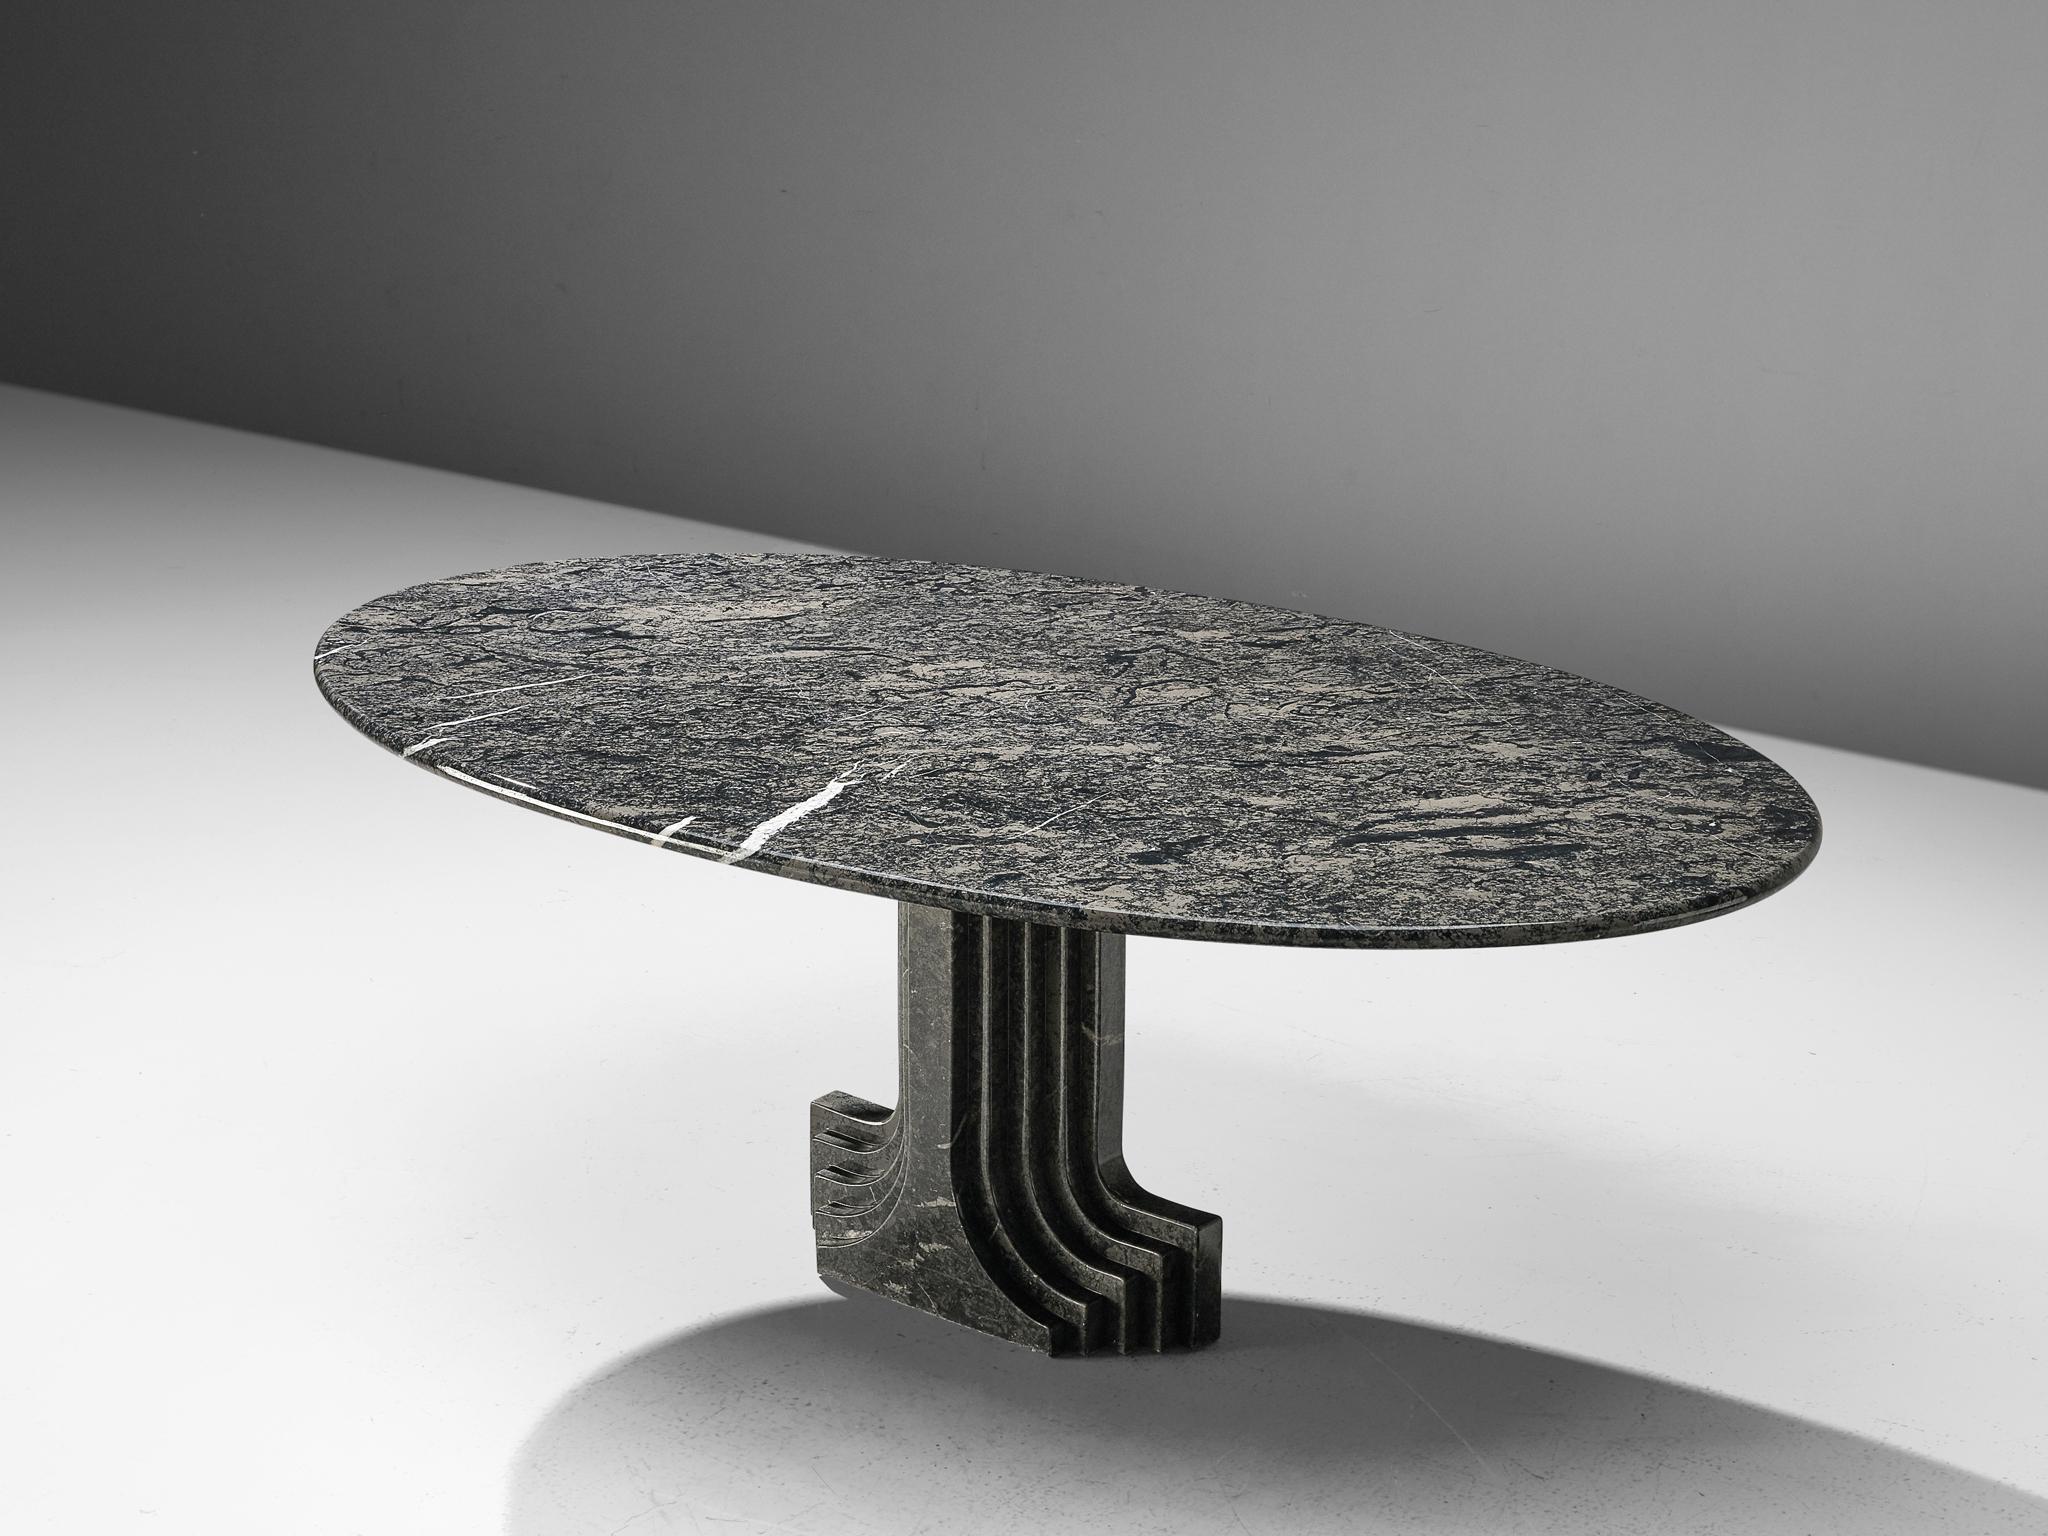 Carlo Scarpa for Simon, oval table, marble, Italy, 1970s.

Carlo Scarpa was trained as an architect and influenced by various themes. His main focus was the material itself followed by nature, Venetian and Japanese culture. This 'argo marble table